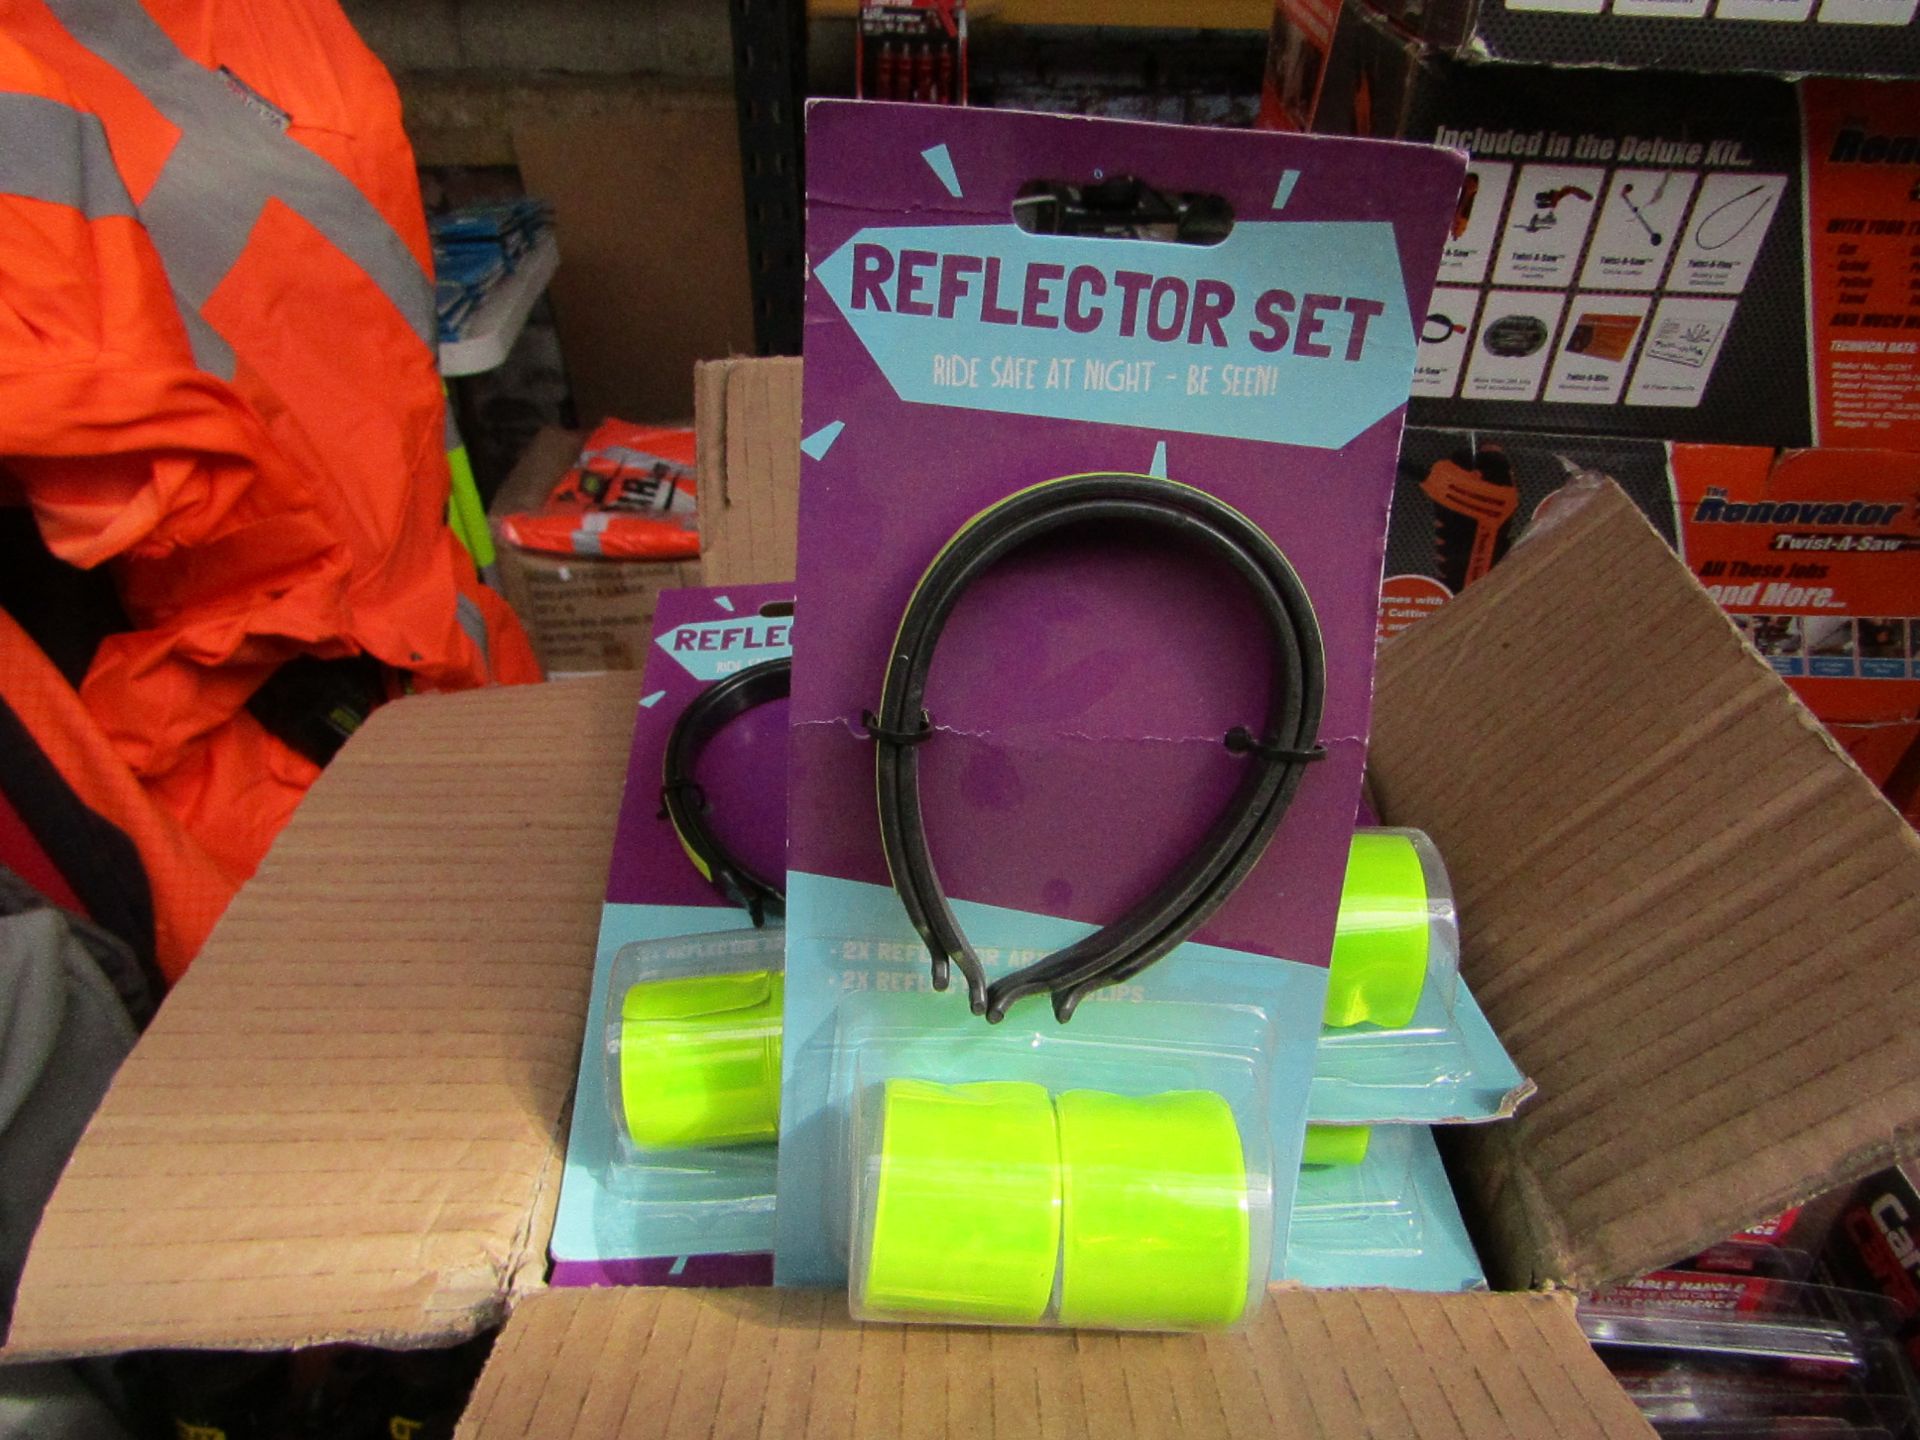 6x 4piece cycle reflector sets, new